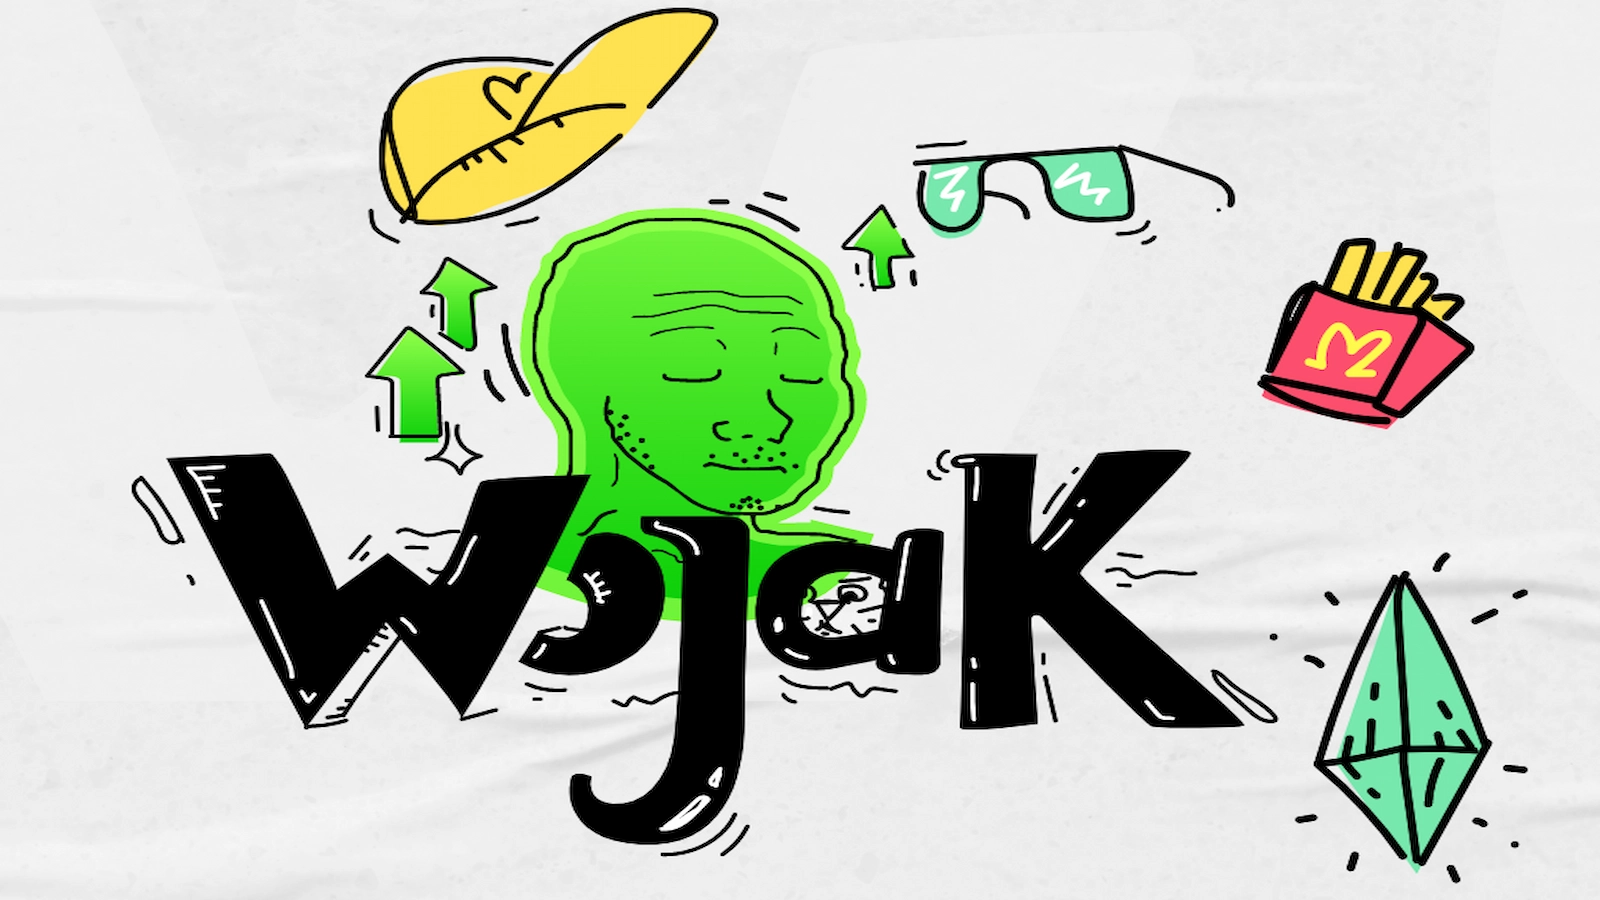 Wojak coin price plummeted after charting a new ATH